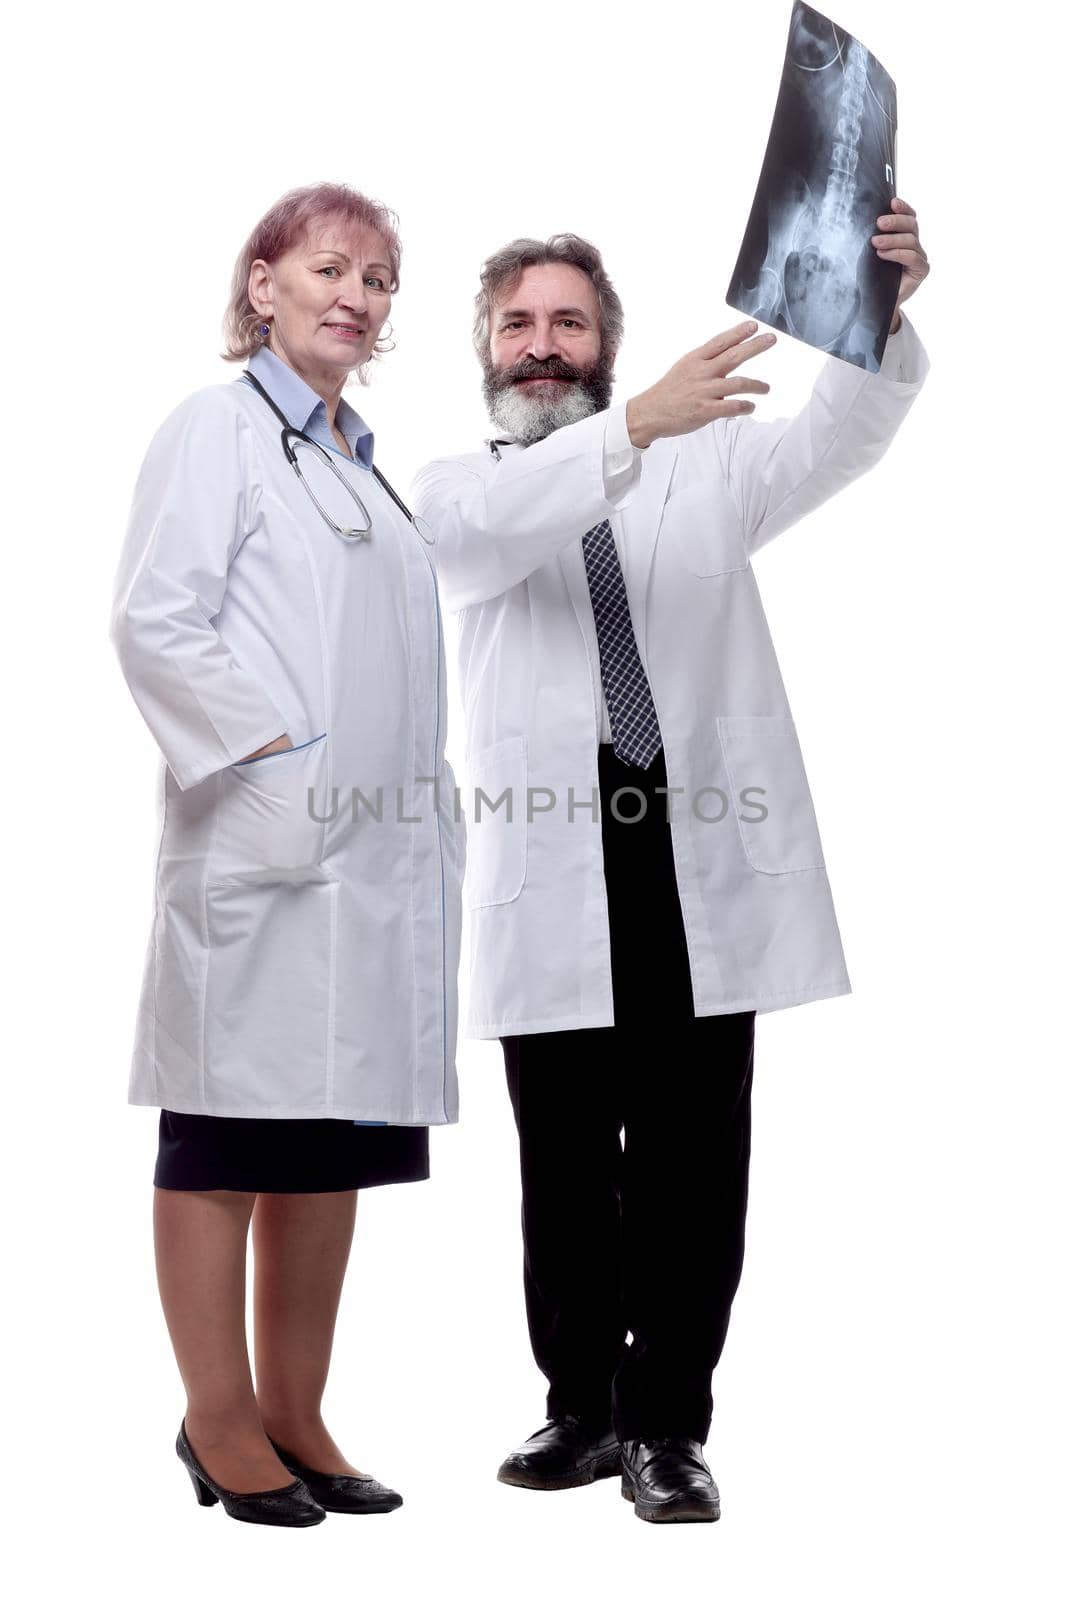 in full growth. medical colleagues discussing the x-ray . isolated on a white background